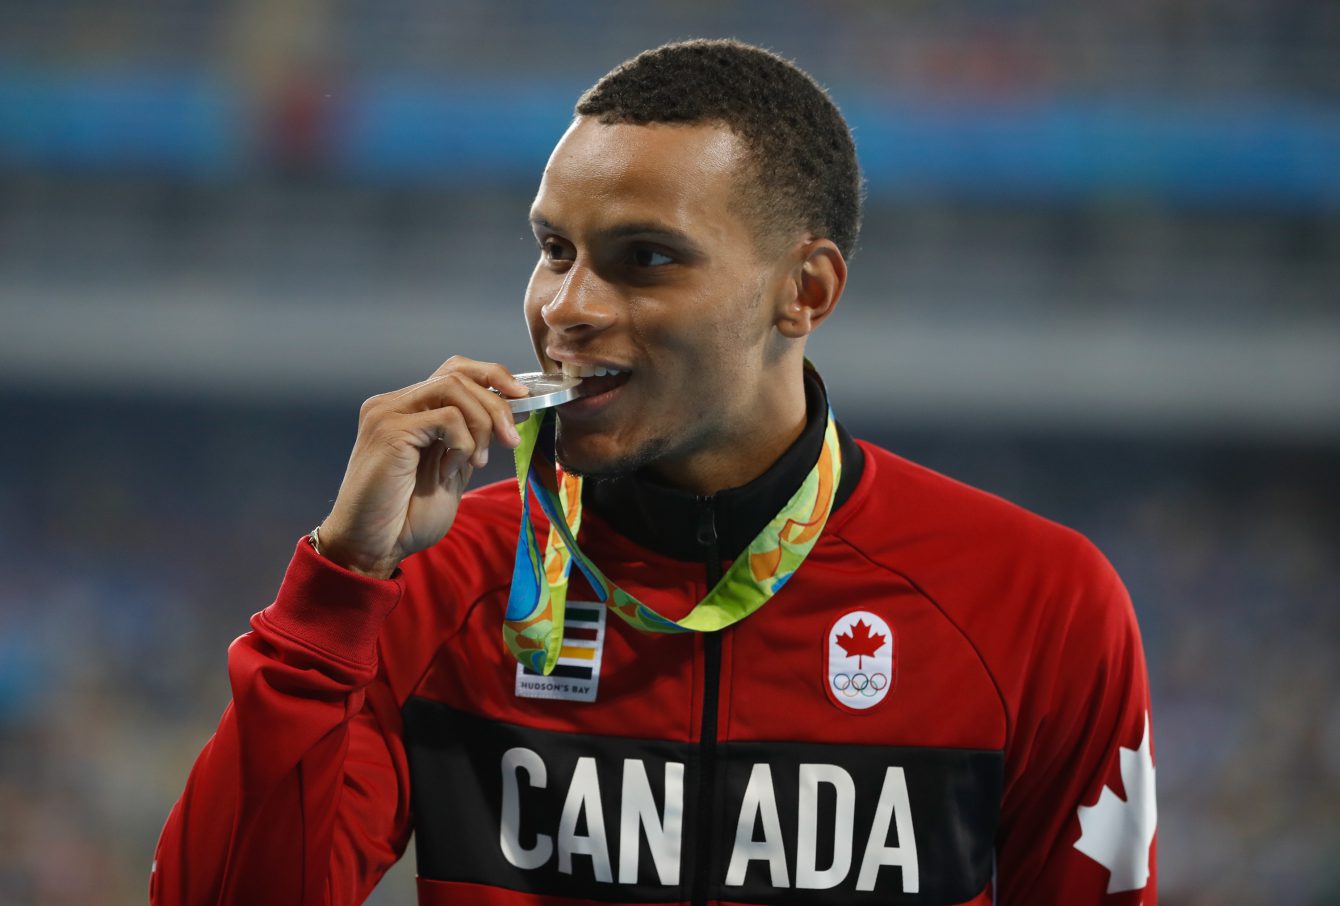 Andre De Grasse bites his 200m silver medal at Rio 2016. (August 19, 2016. COC Photo/Mark Blinch)